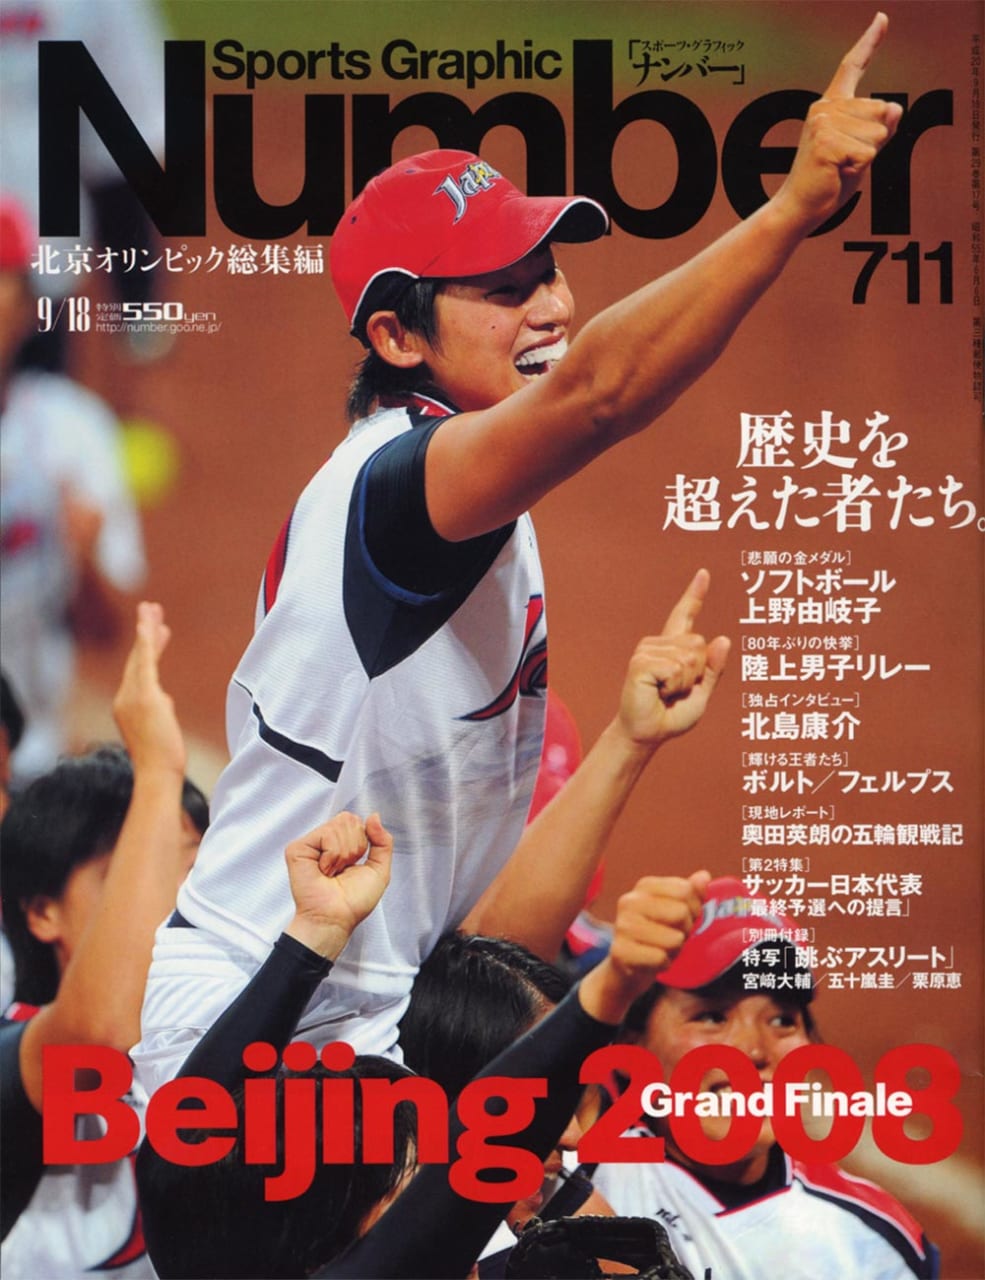 Sports Graphic Number 711号
2008年8月28日発売
表紙撮影：AFLO SPORT